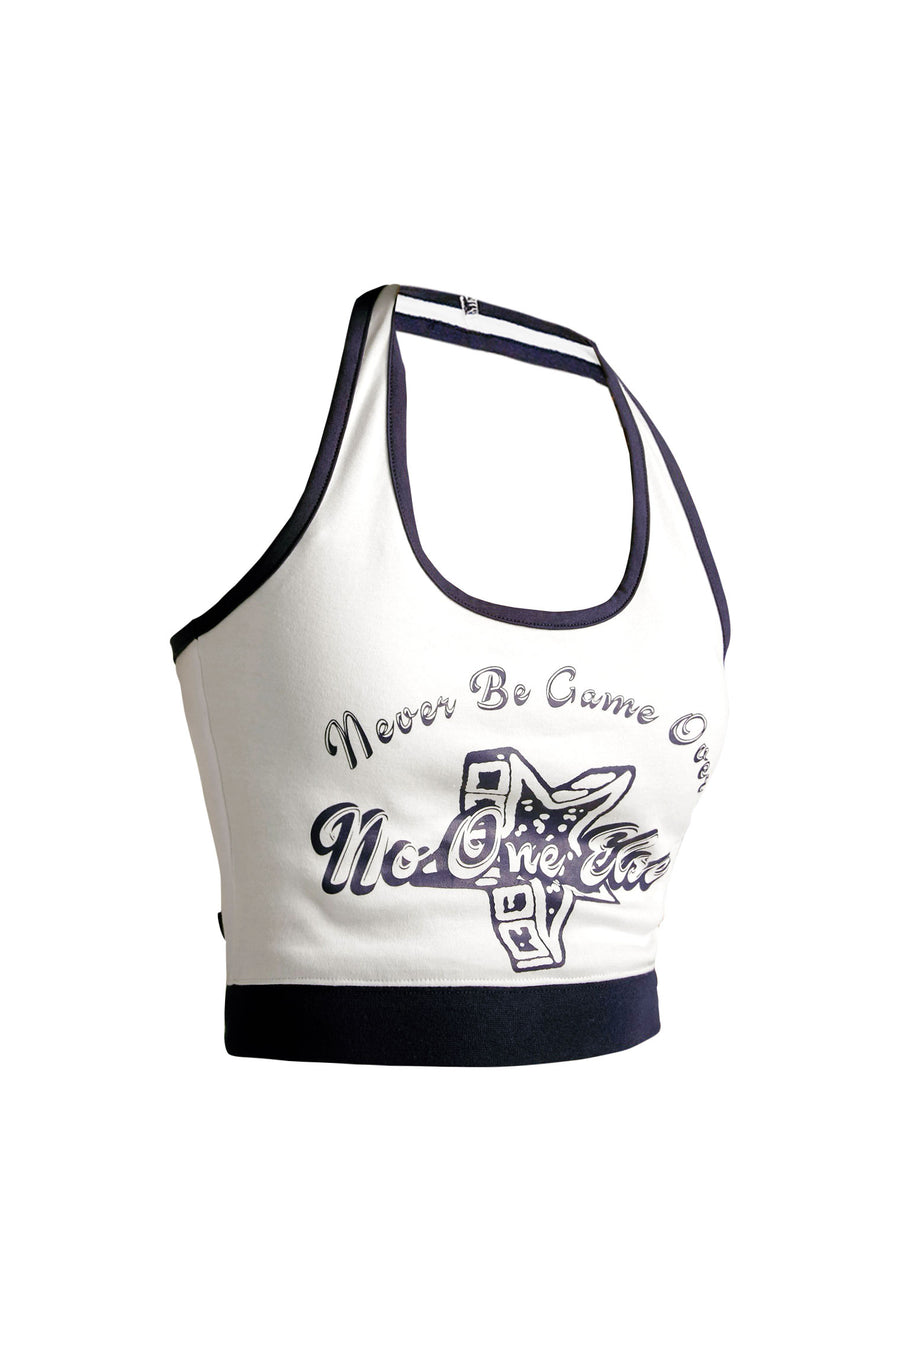 Never Be Game Over Sleeveless Crop Top